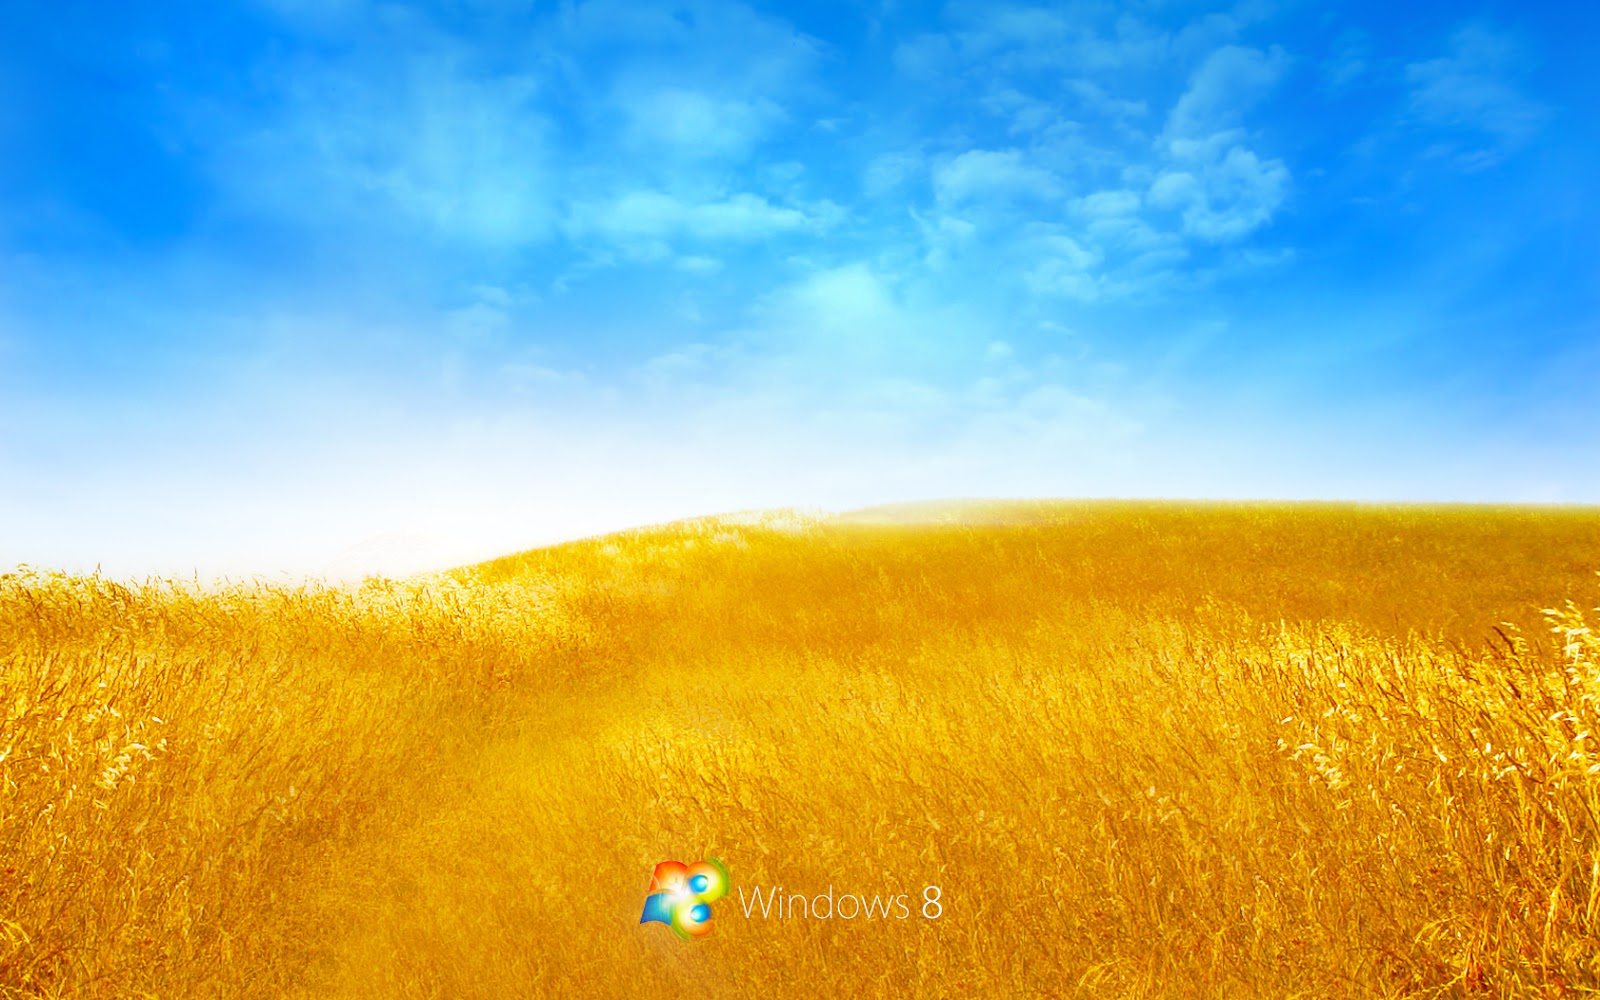 Windows 8 Wallpapers Collection 2013 Windows Server 2012 System